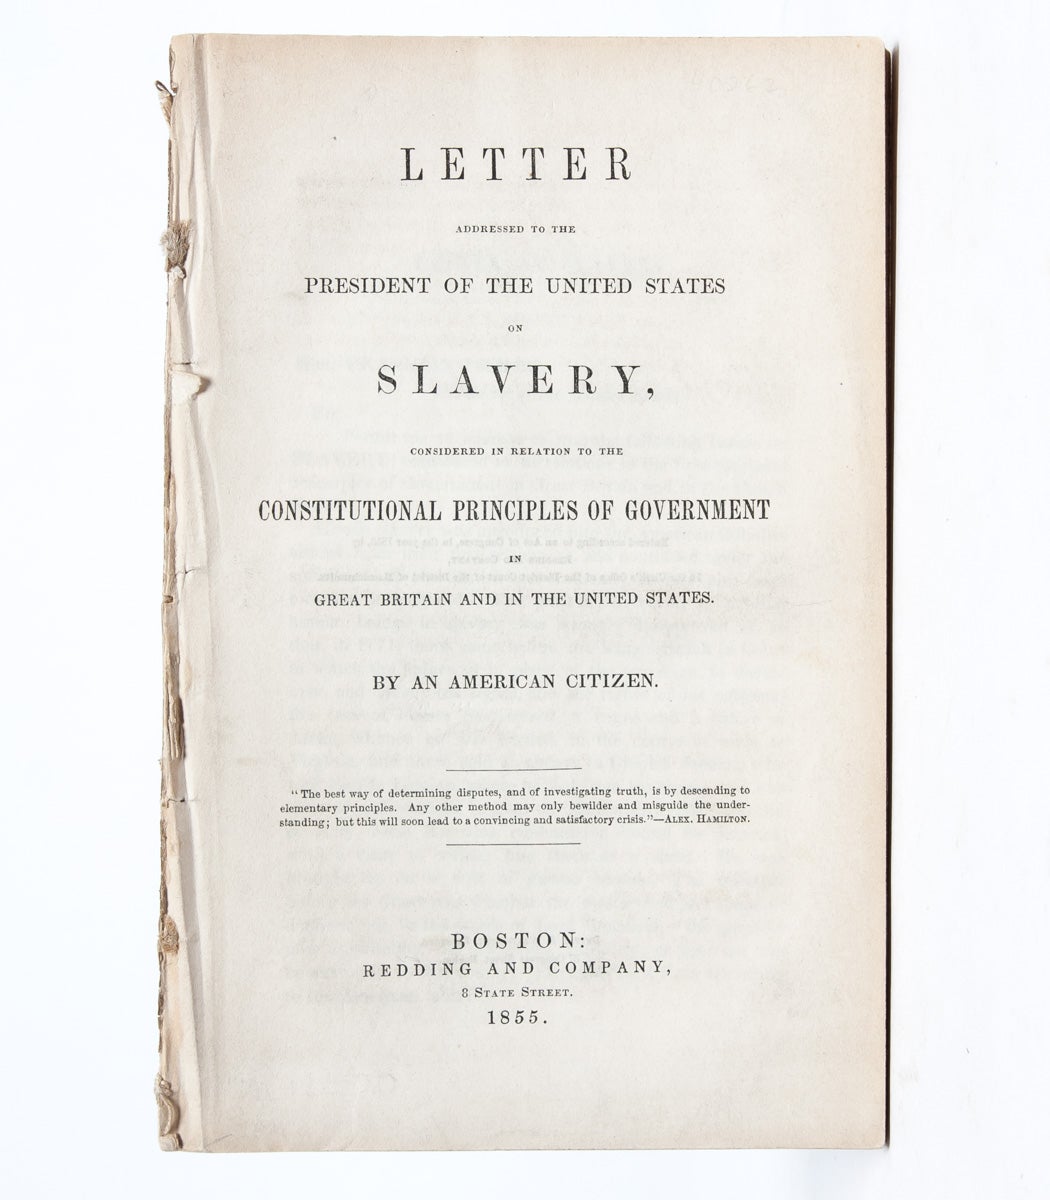 (Item #2722) Letter Addressed to the President of the United States on Slavery, Considered in Relation to the Constitutional Principles of Government. An American Citizen, Jesse Chickering.